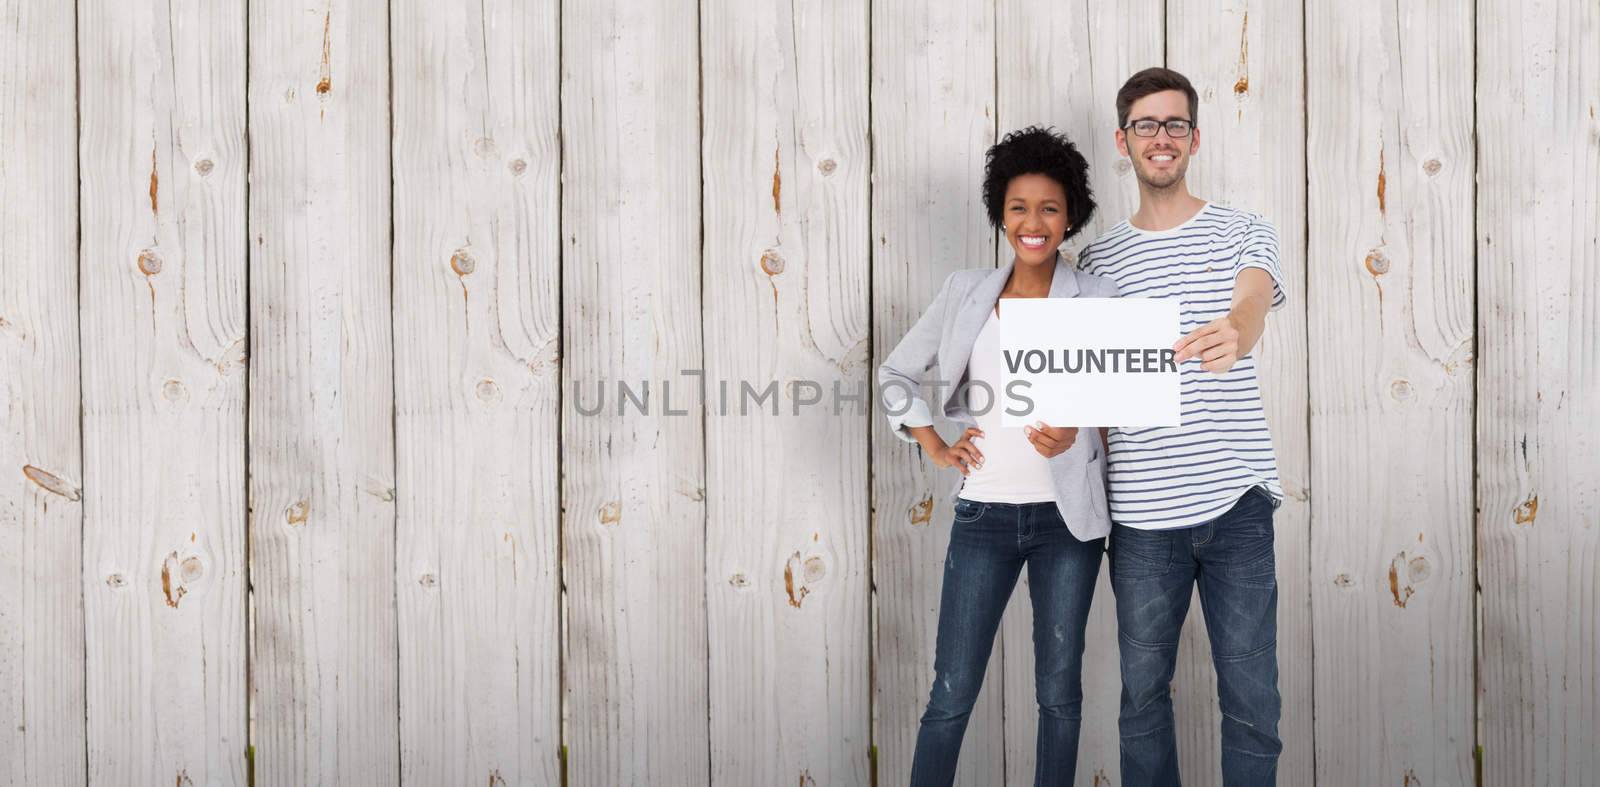 Portrait of a happy couple holding a volunteer note against wooden background